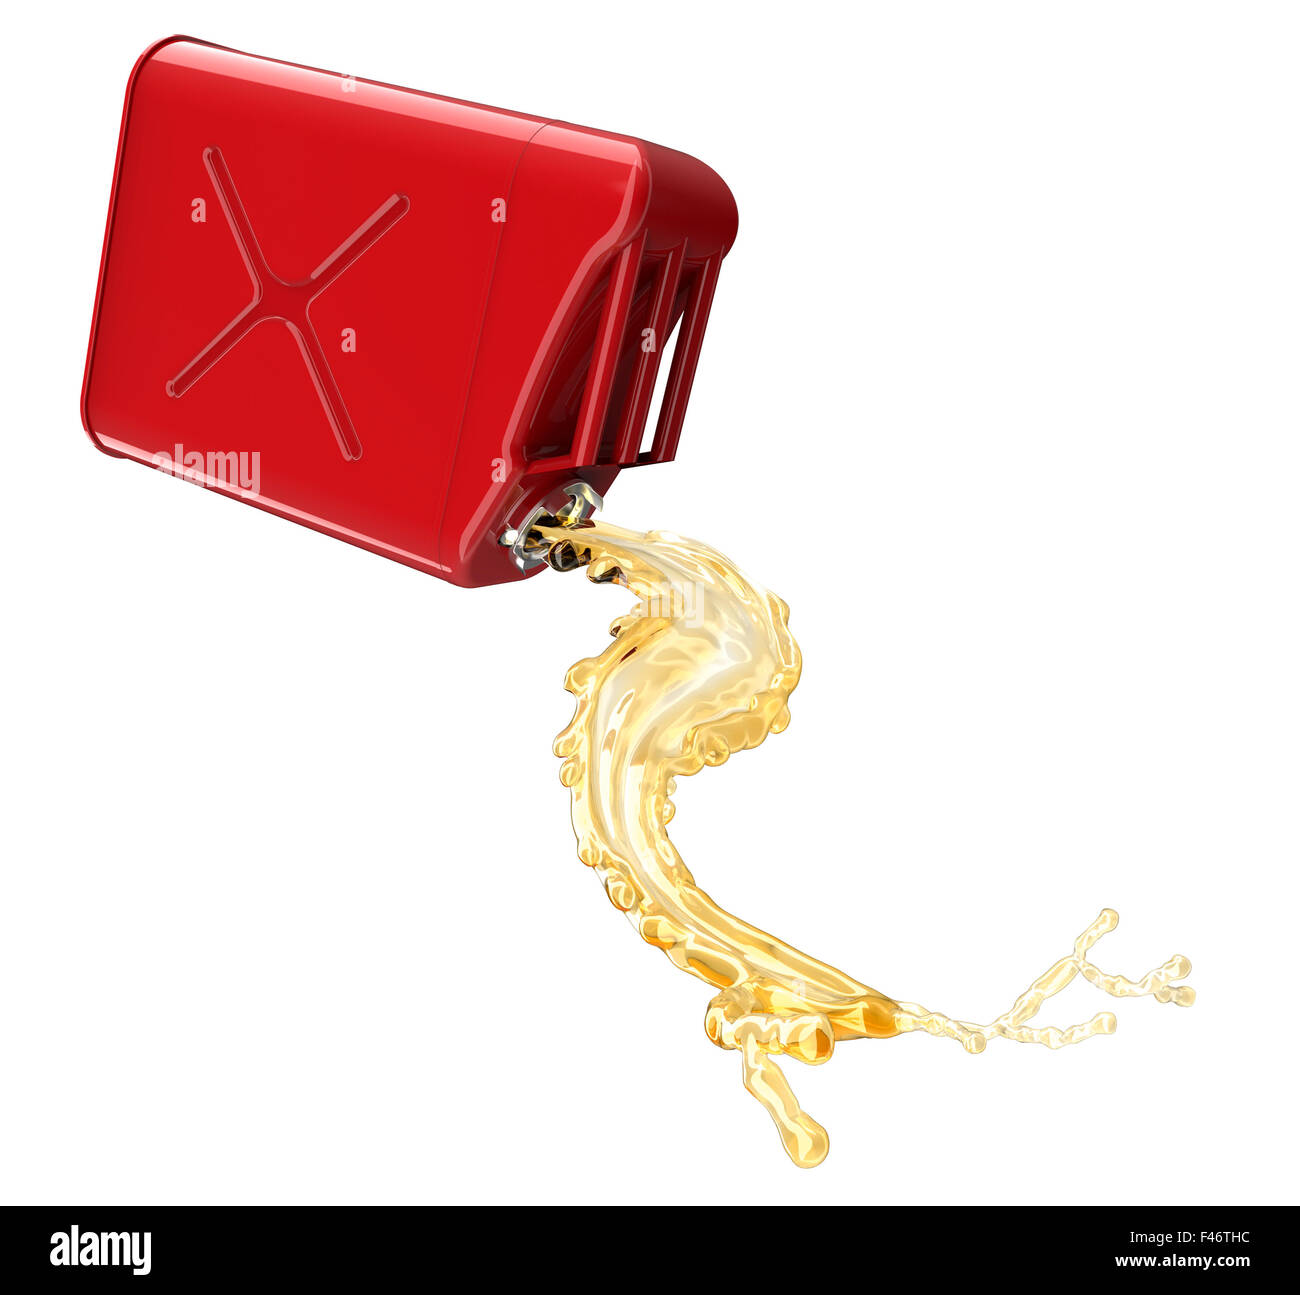 red jerry can with oil pouring and splasing out of it Stock Photo